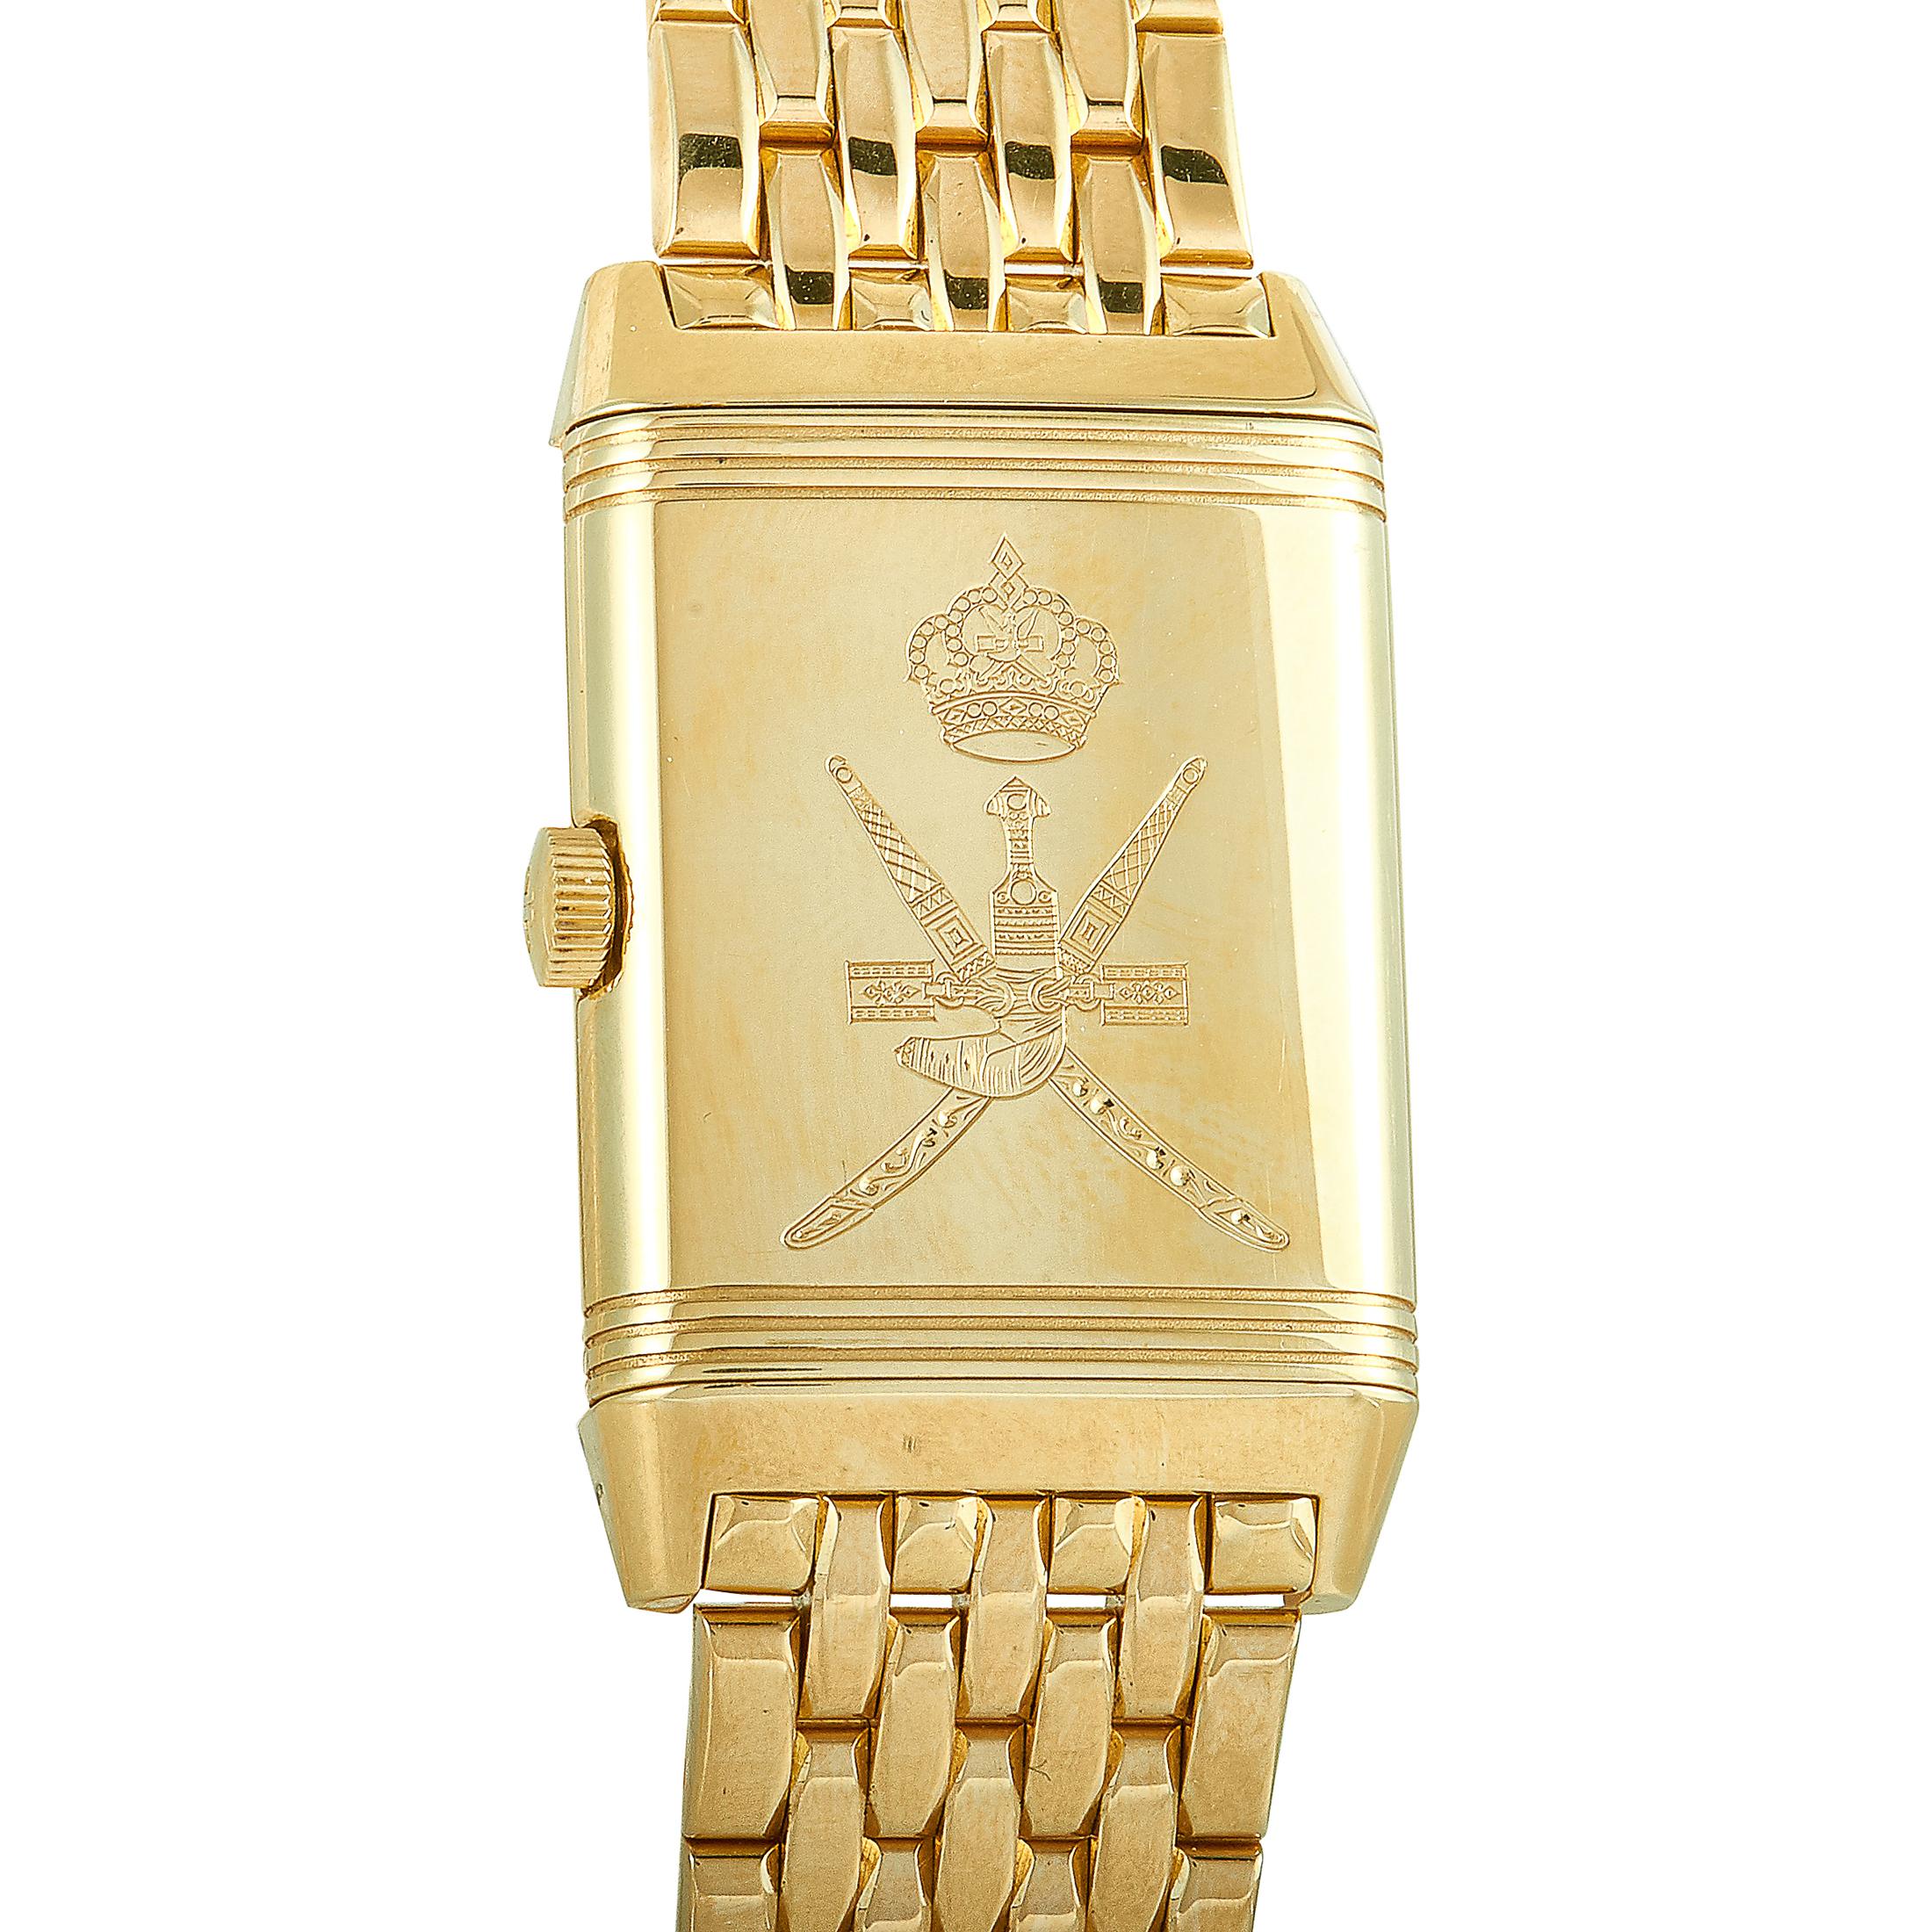 The Jaeger-LeCoultre Reverso, reference number 270162, boasts an 18K yellow gold case presented on a matching 18K yellow gold bracelet. The watch was made for the sultan of Oman and is powered by a hand-wound movement and features the following